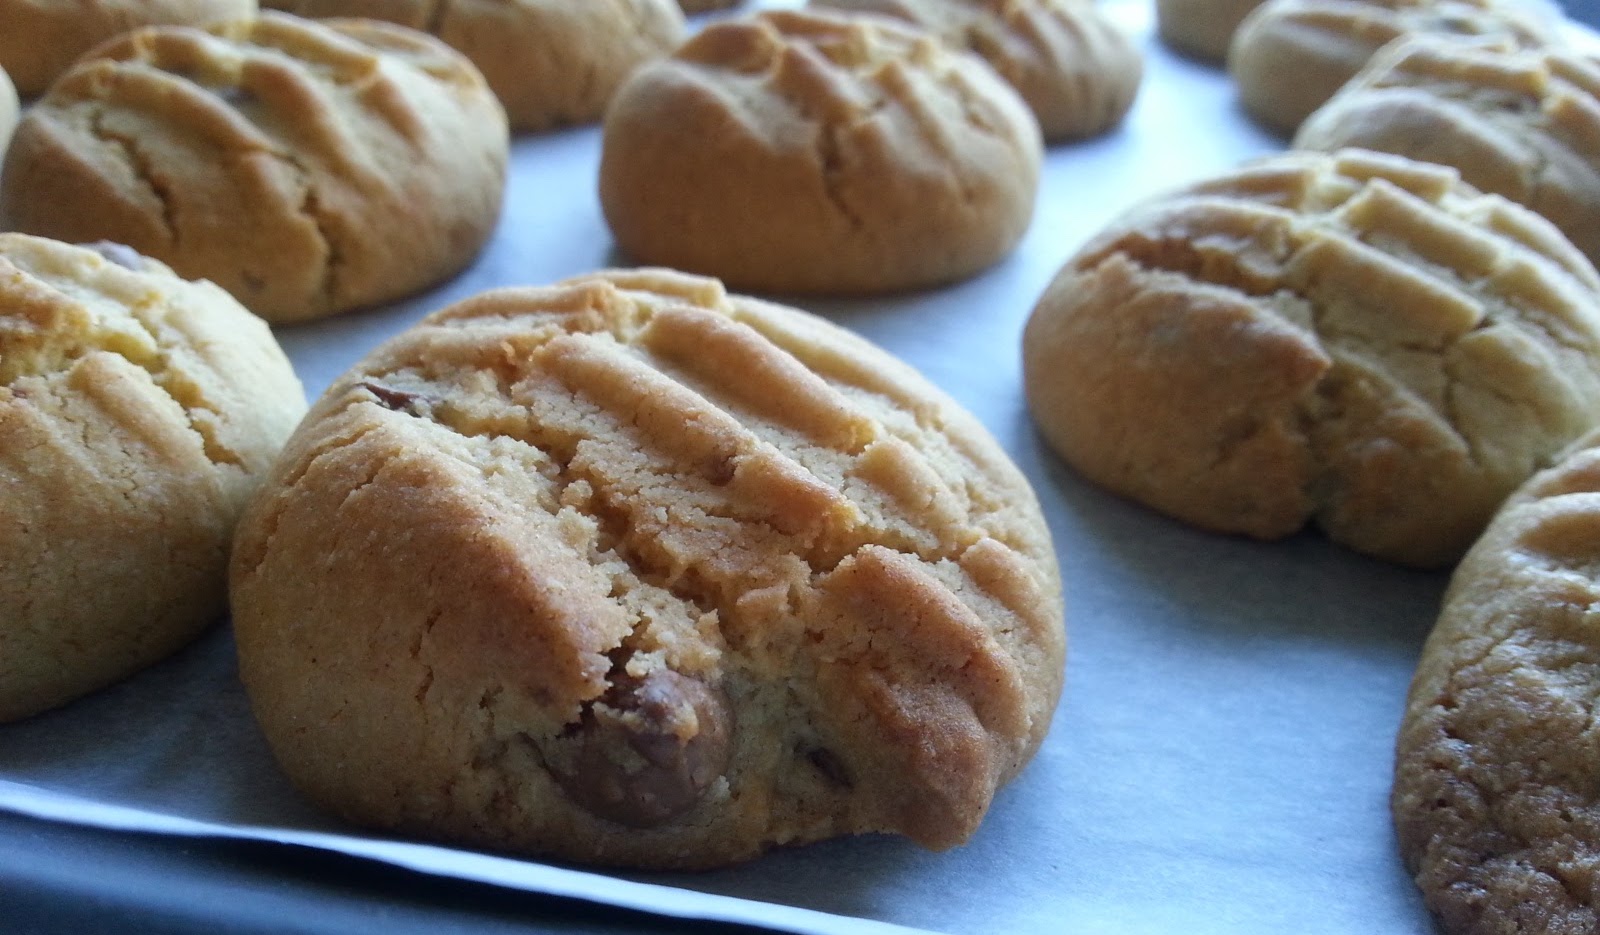 Almond and chocolate chip biscuit